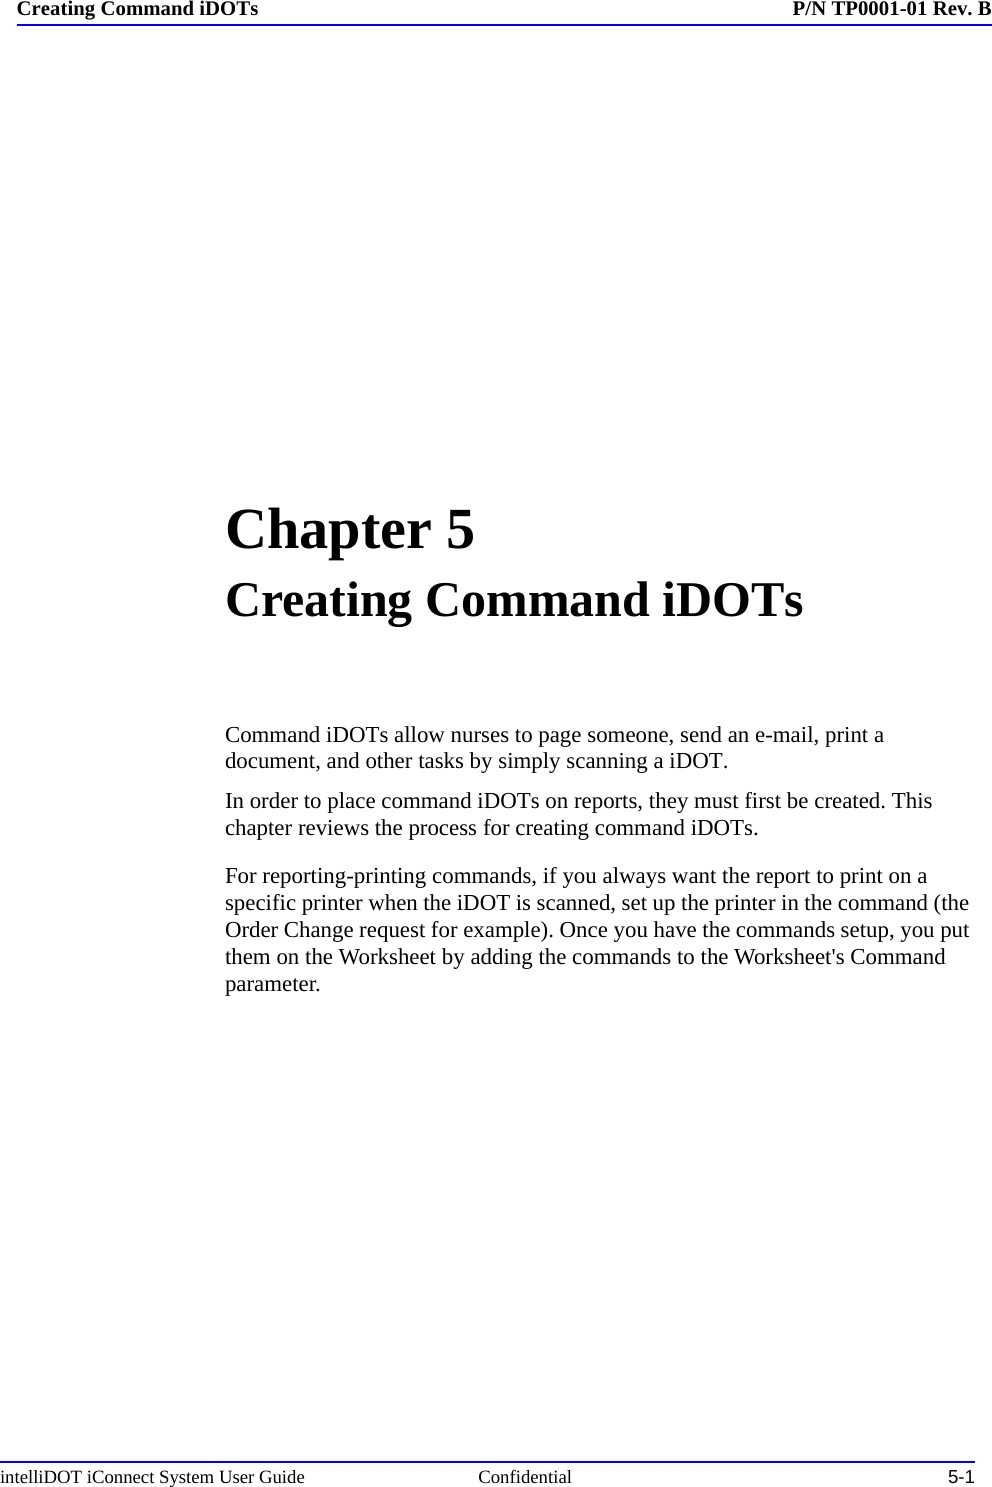 intelliDOT iConnect System User Guide  Confidential 5-1Creating Command iDOTs P/N TP0001-01 Rev. BChapter 5Creating Command iDOTsCommand iDOTs allow nurses to page someone, send an e-mail, print a document, and other tasks by simply scanning a iDOT. In order to place command iDOTs on reports, they must first be created. This chapter reviews the process for creating command iDOTs. For reporting-printing commands, if you always want the report to print on a specific printer when the iDOT is scanned, set up the printer in the command (the Order Change request for example). Once you have the commands setup, you put them on the Worksheet by adding the commands to the Worksheet&apos;s Command parameter.